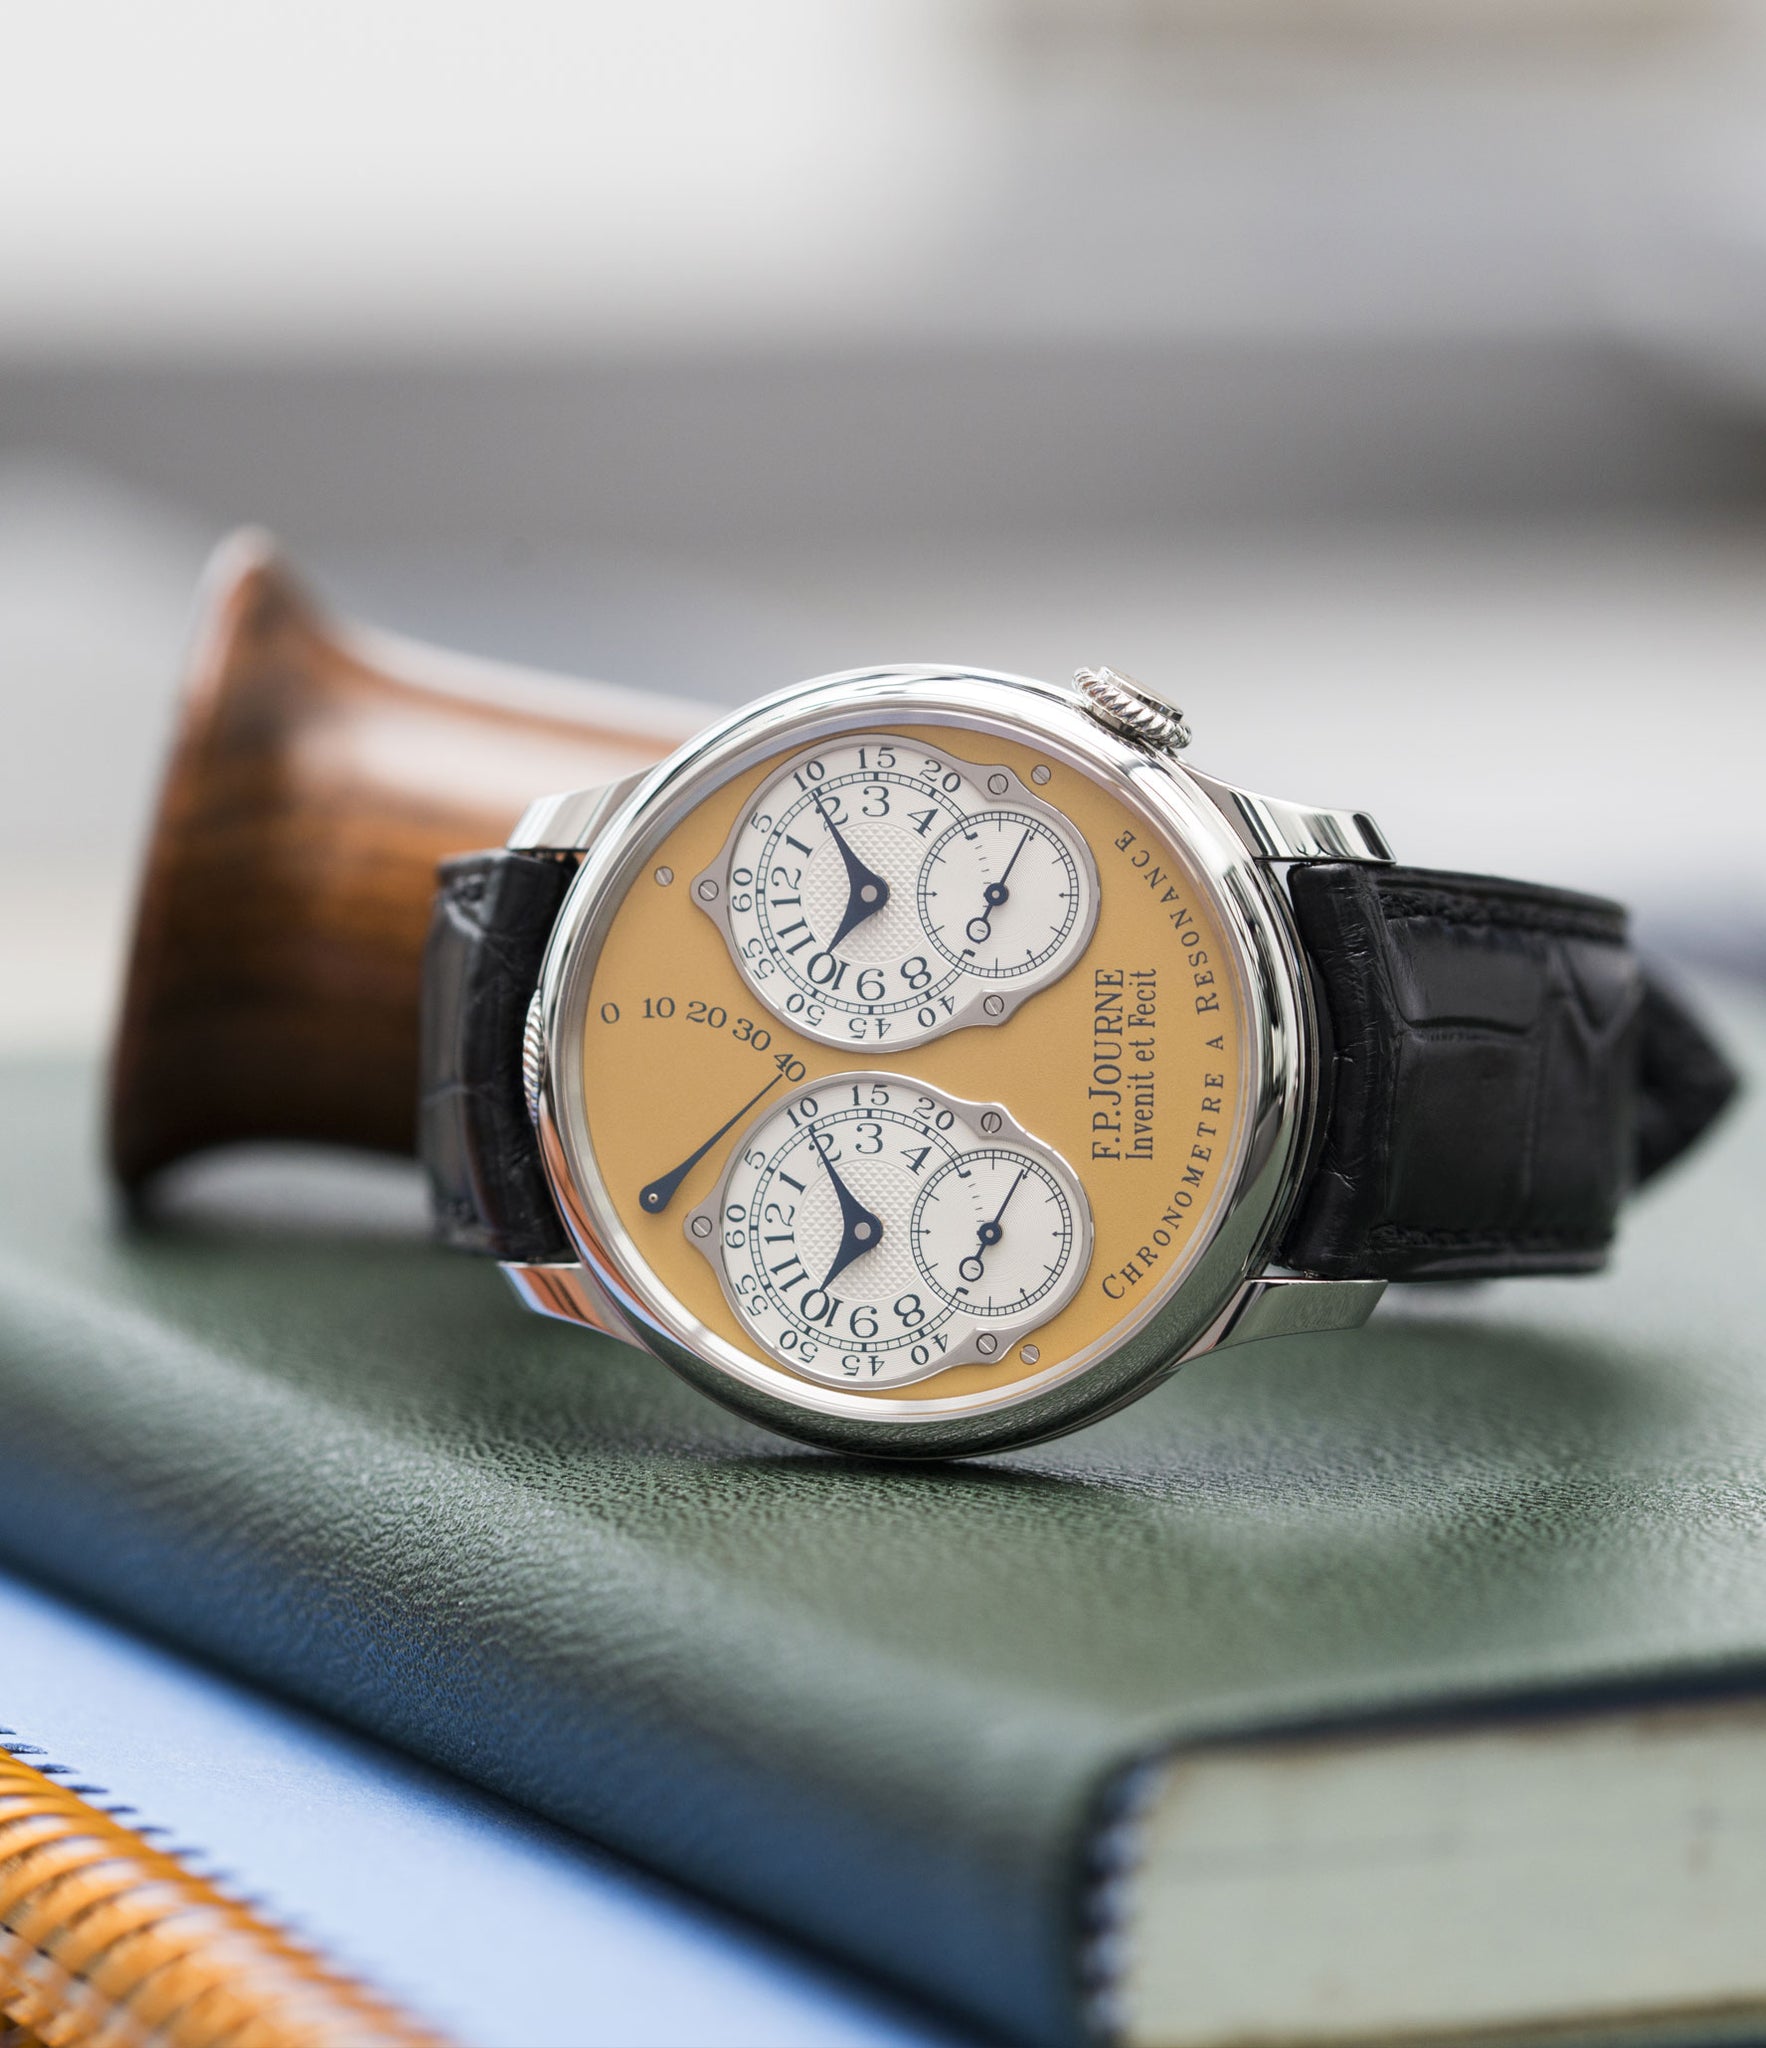 selling F. P. Journe Chronomètre à Résonance Steel 38 mm Limited Edition Set of 5 watches for sale online at A Collected Man London approved UK retailer independent watchmakers